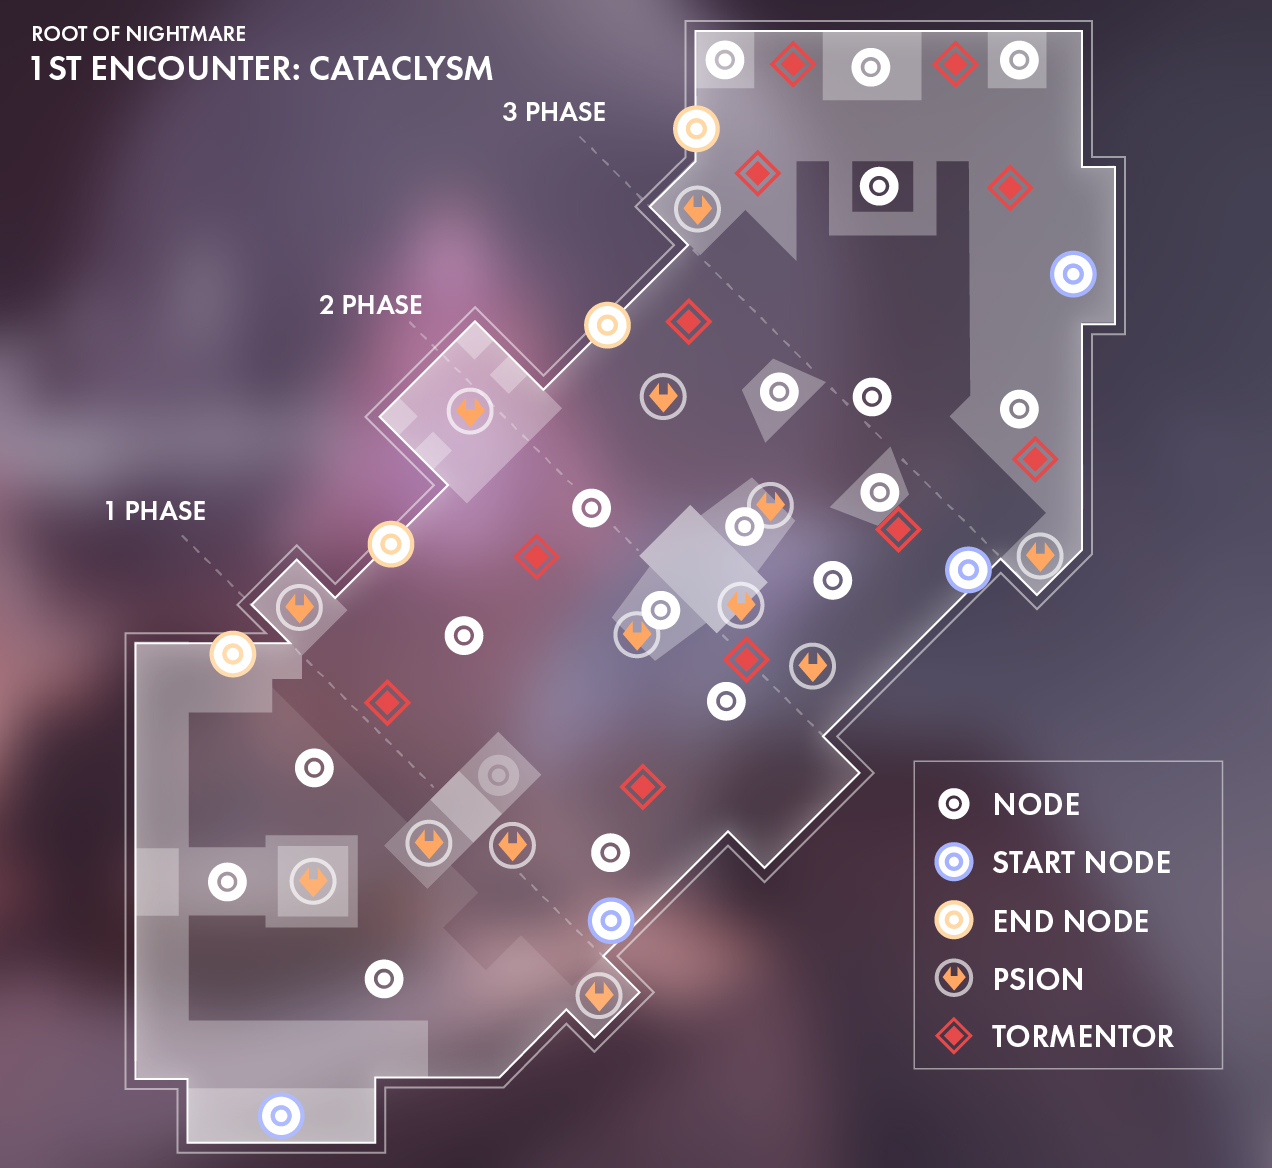 Destiny Bulletin on X: RT if you know this map! #Destiny2